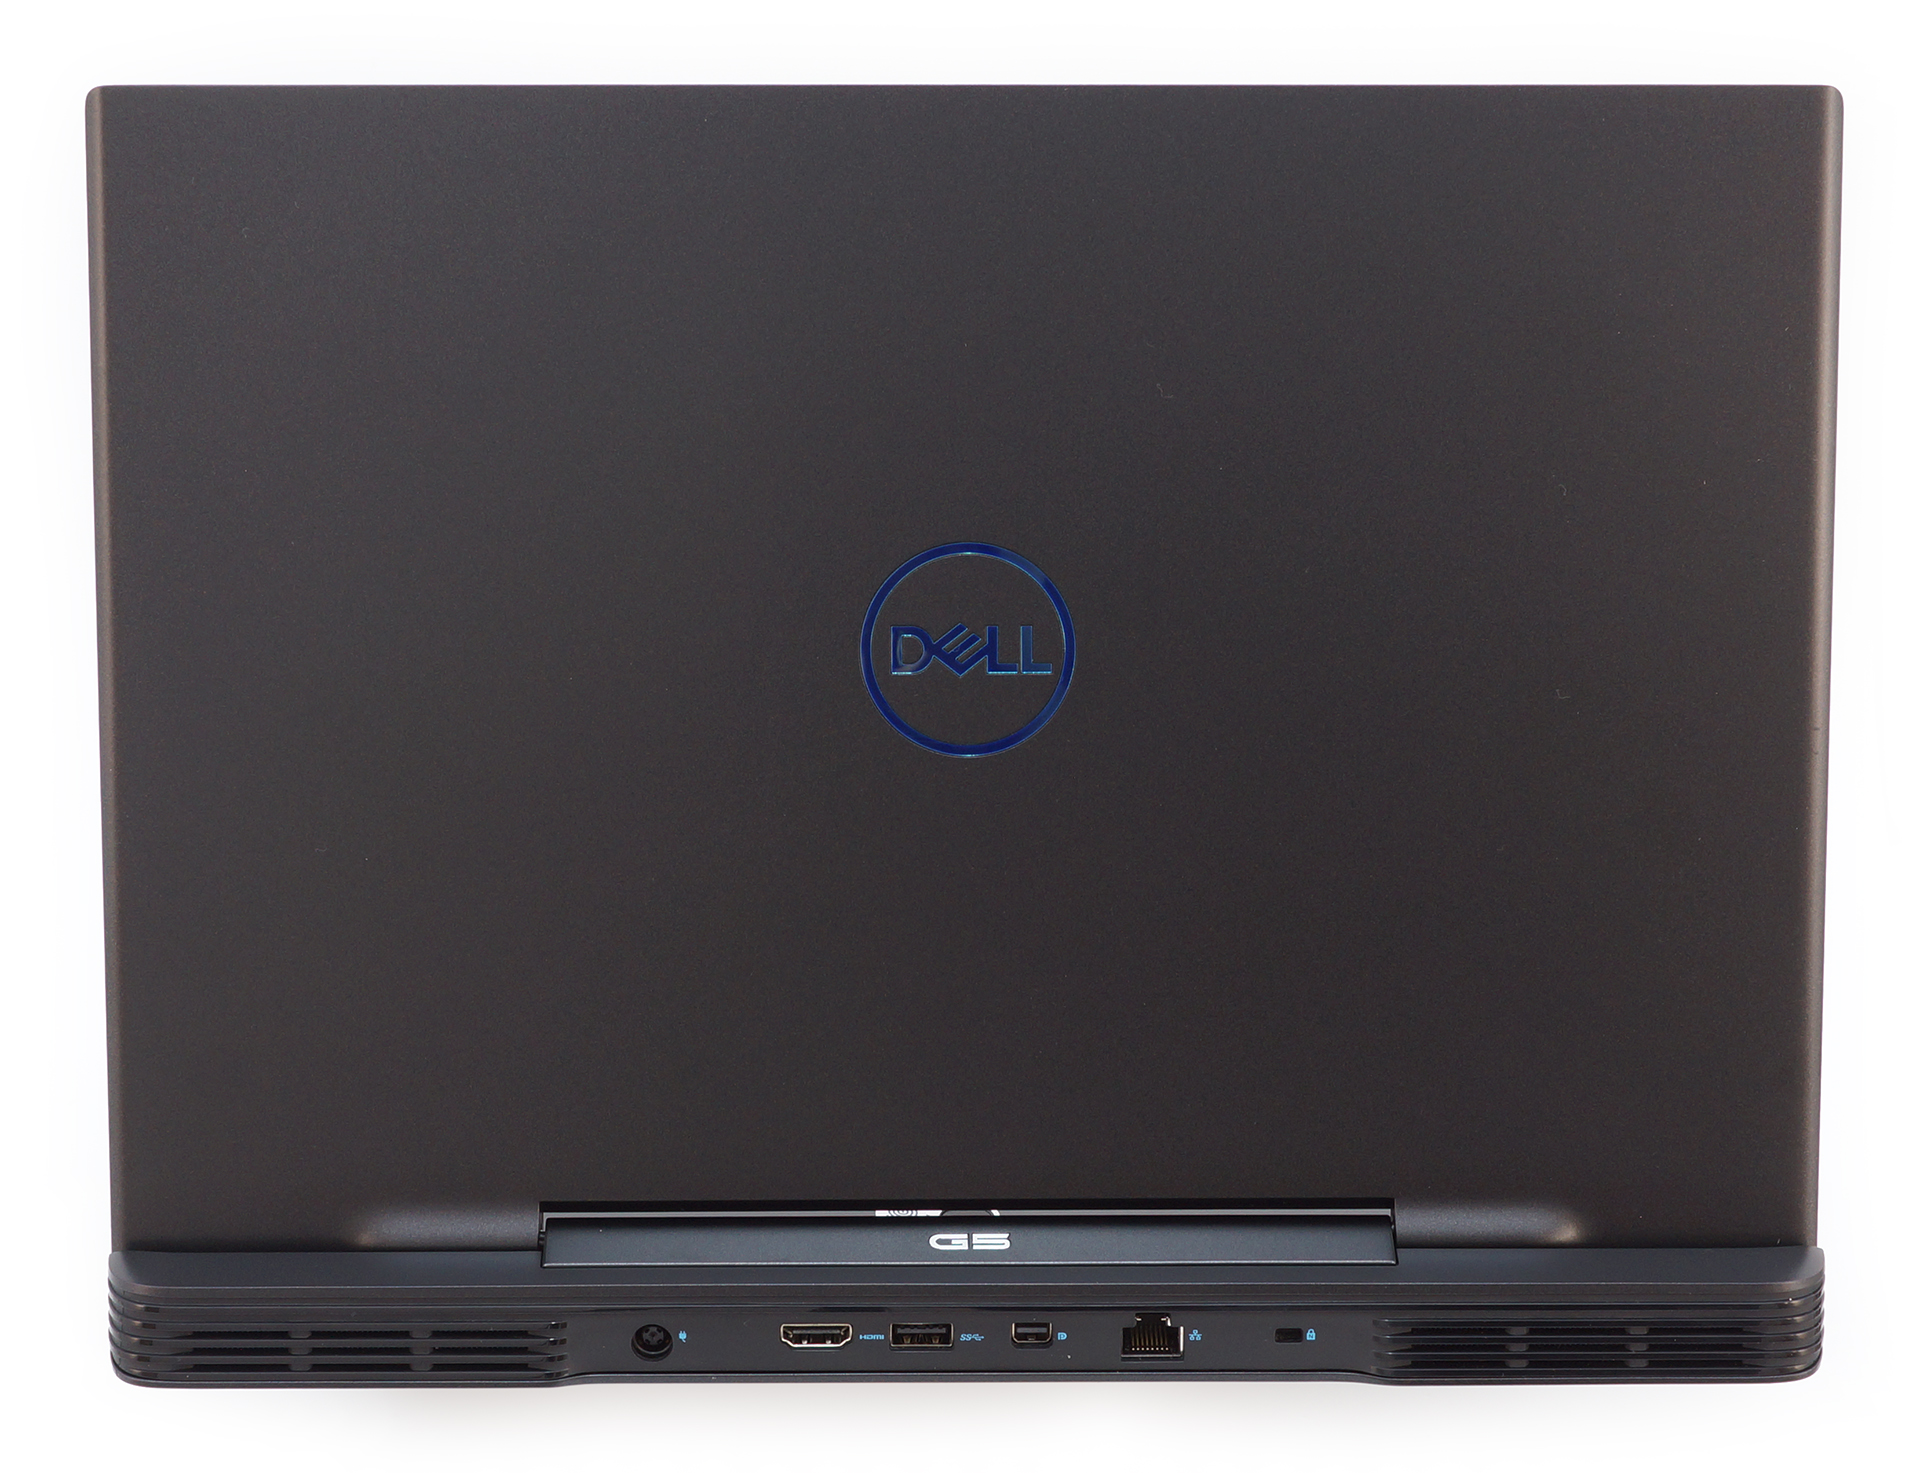 Dell G5 15 5590 review - aims high with its RTX capabilities